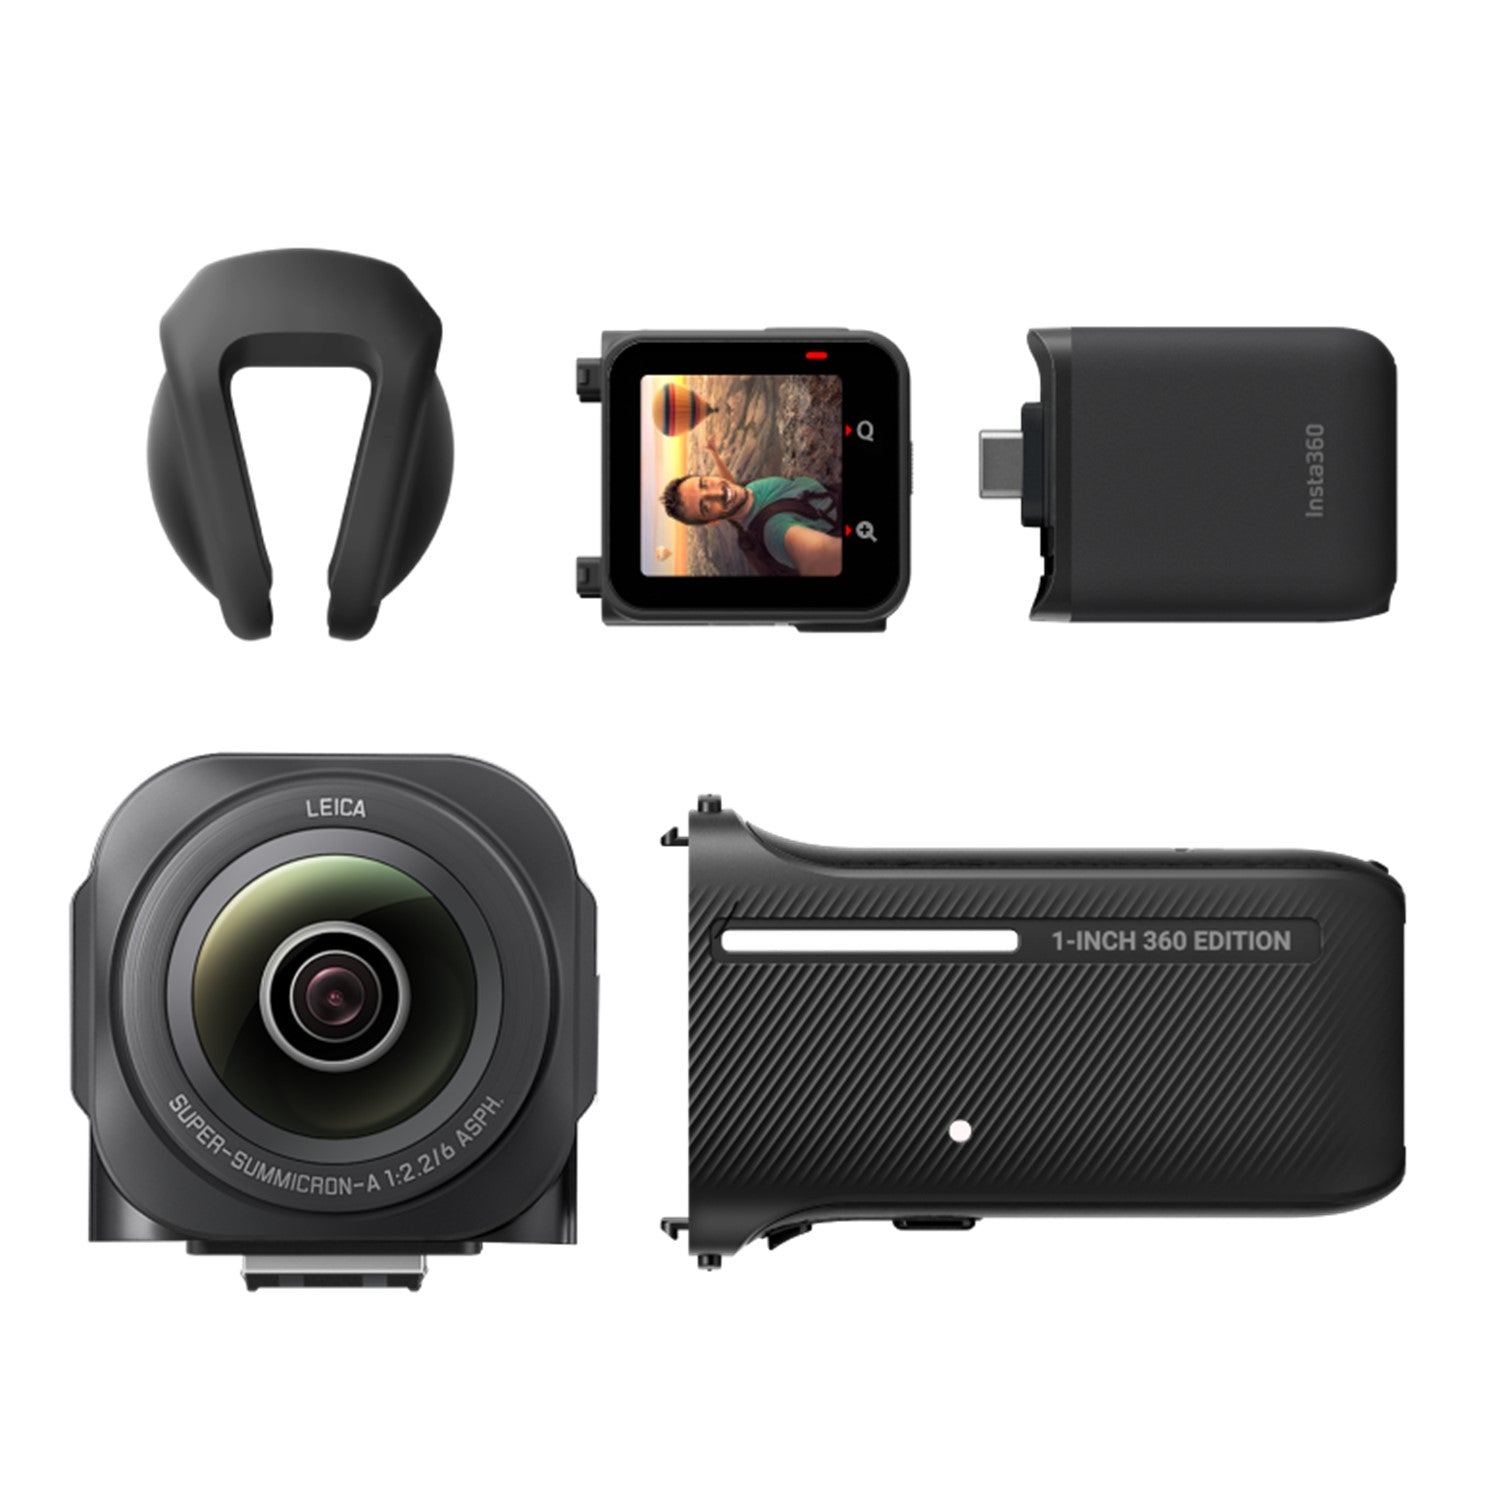 Insta360 One RS 1-Inch 360 Edition Action Camera